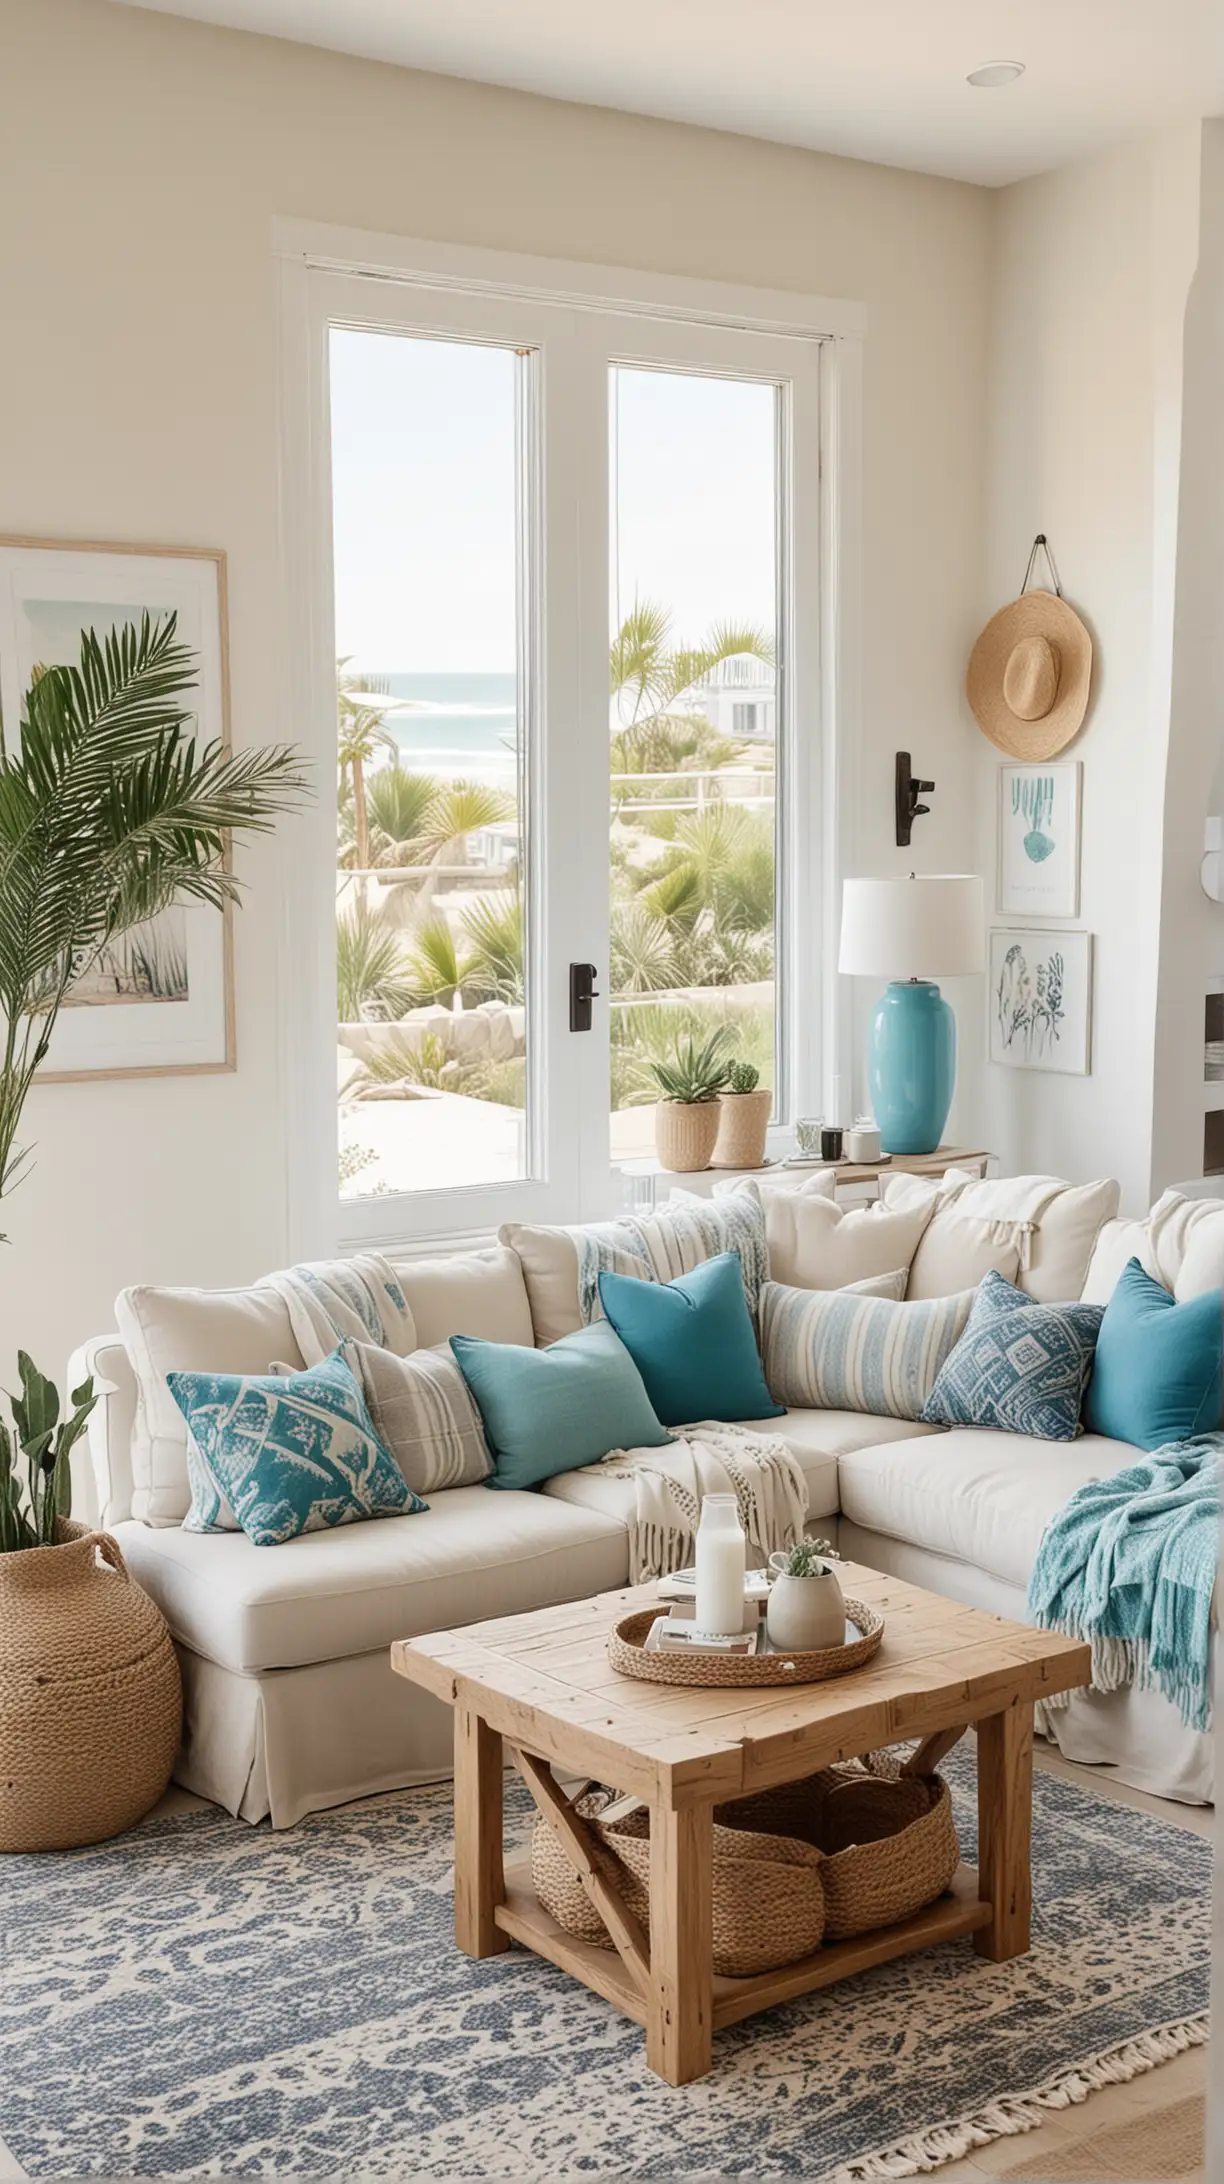 "A boho-coastal living room with neutral walls, blue and turquoise accents like pillows and throws, natural light, and minimalist decor. The space is serene and airy, embodying a beachy feel."